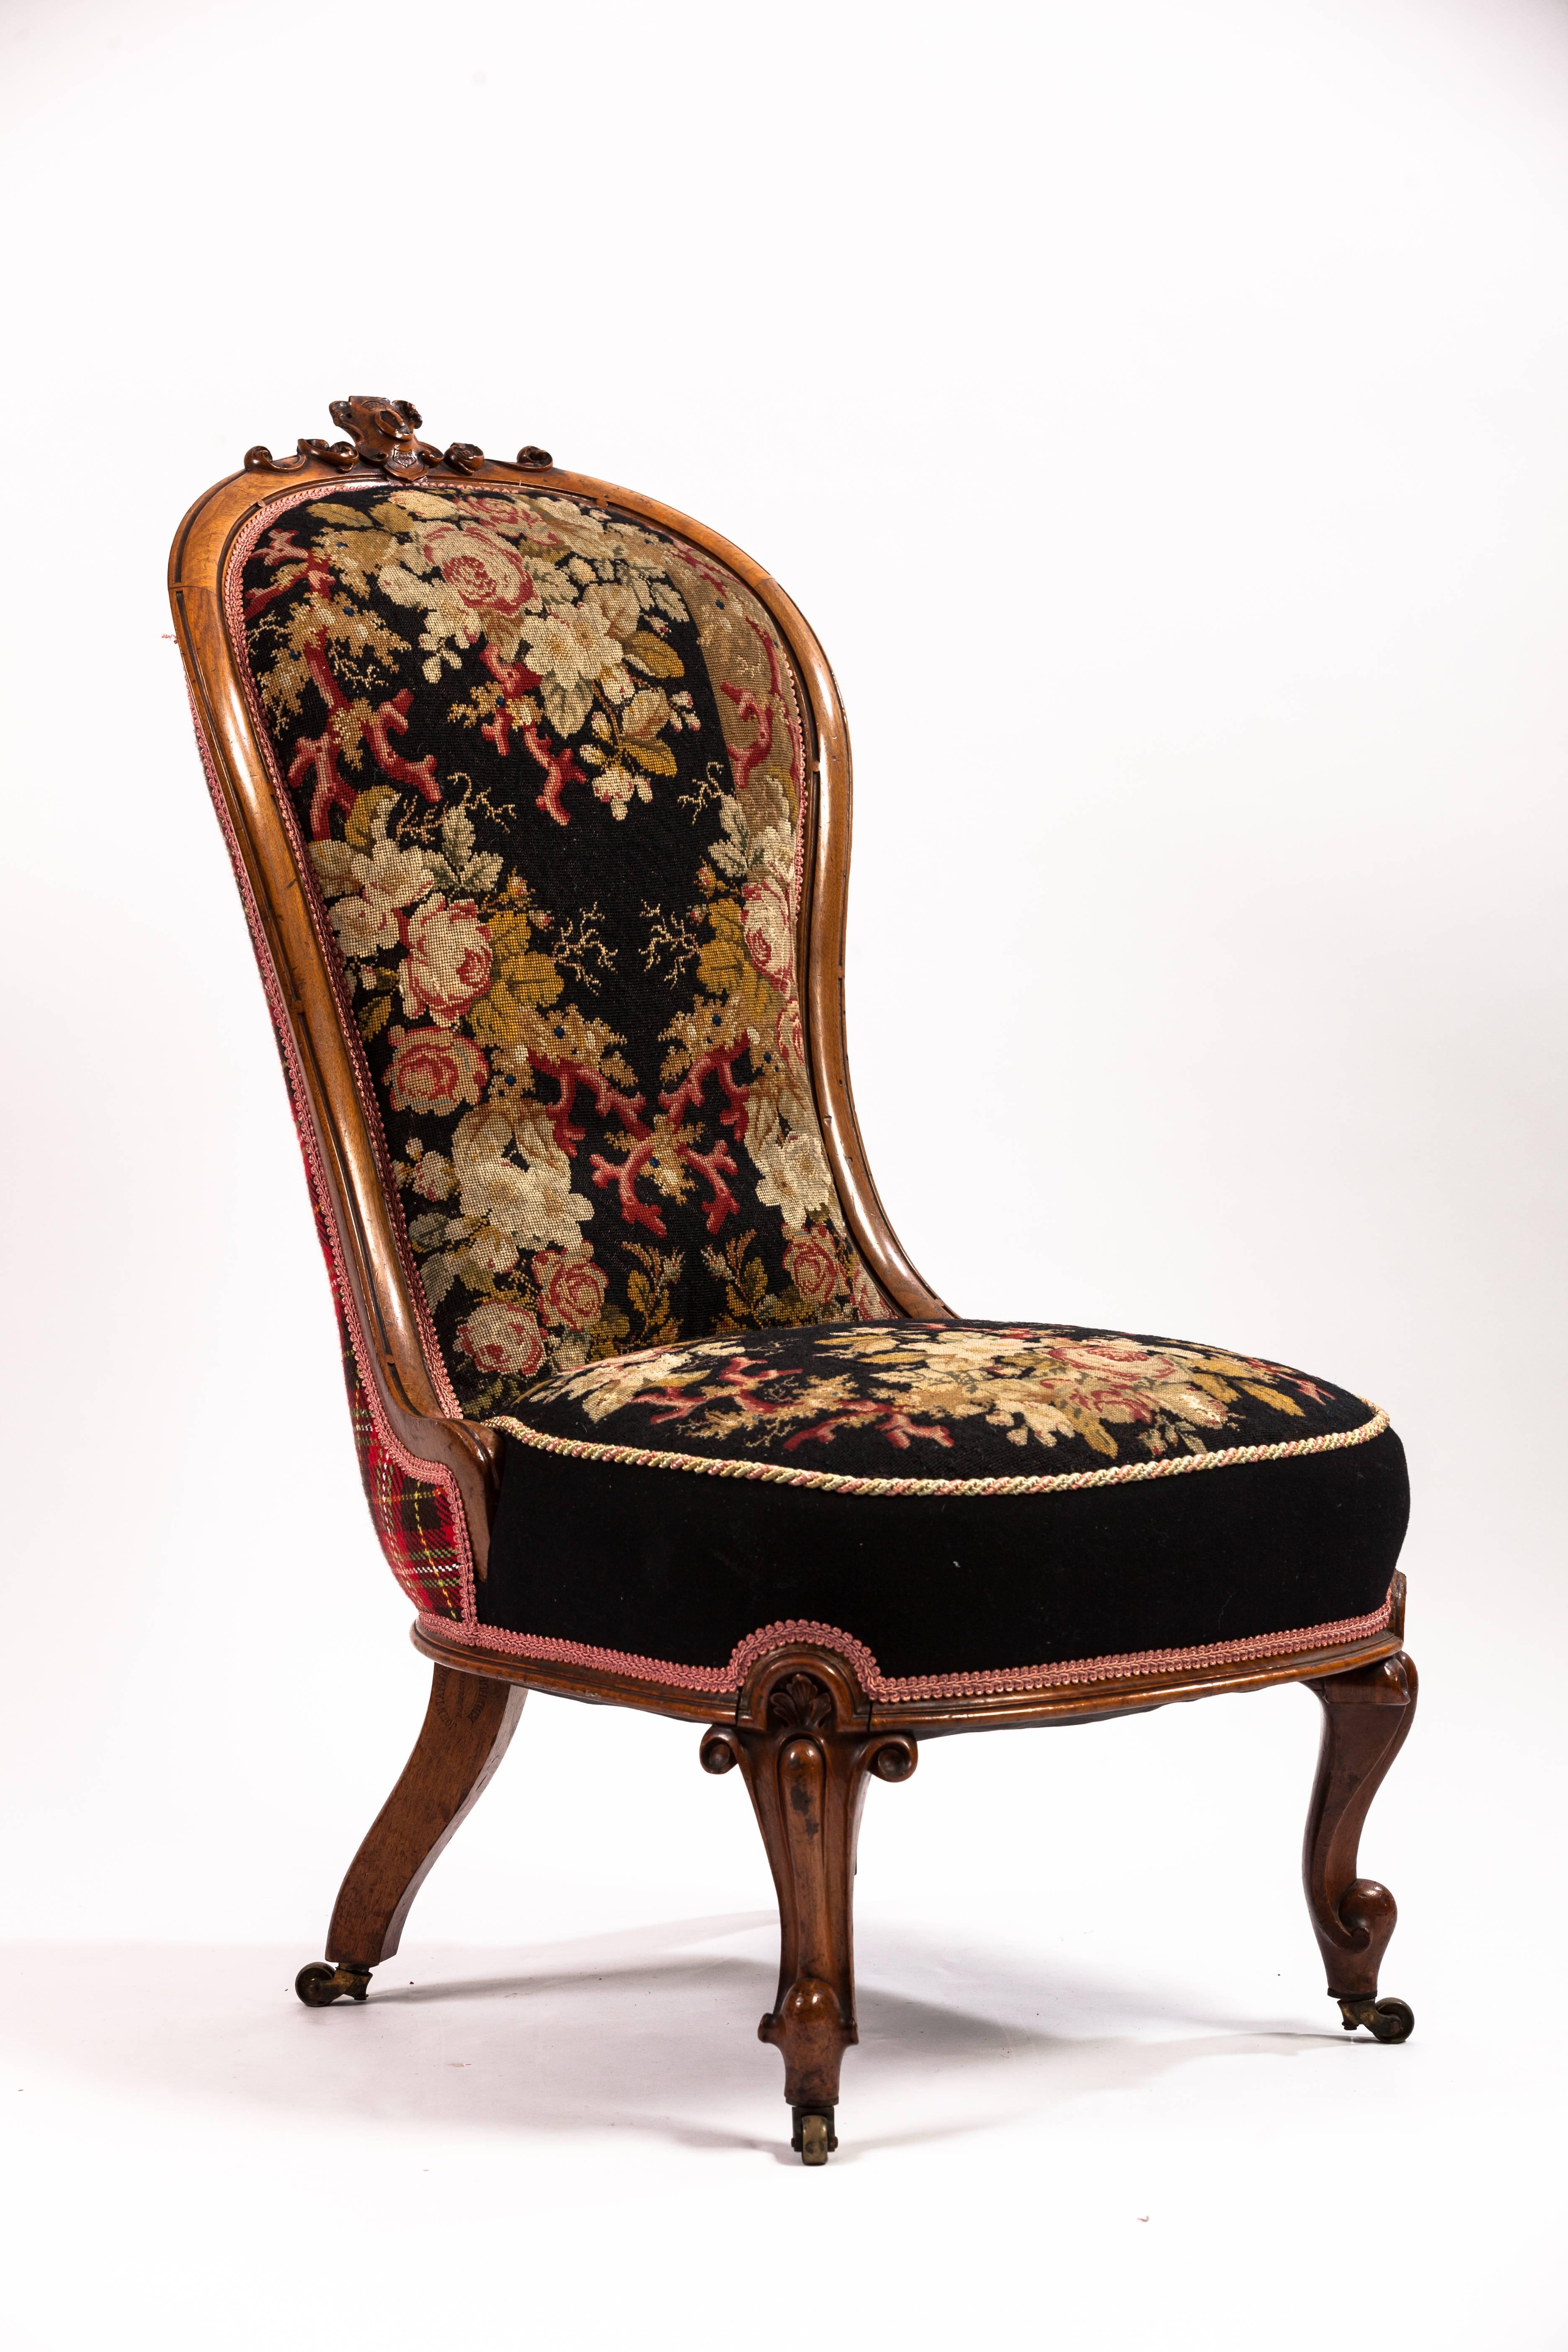 English carved walnut slipper chair, upholstered in an antique needlepoint fabric.

Measures: 16